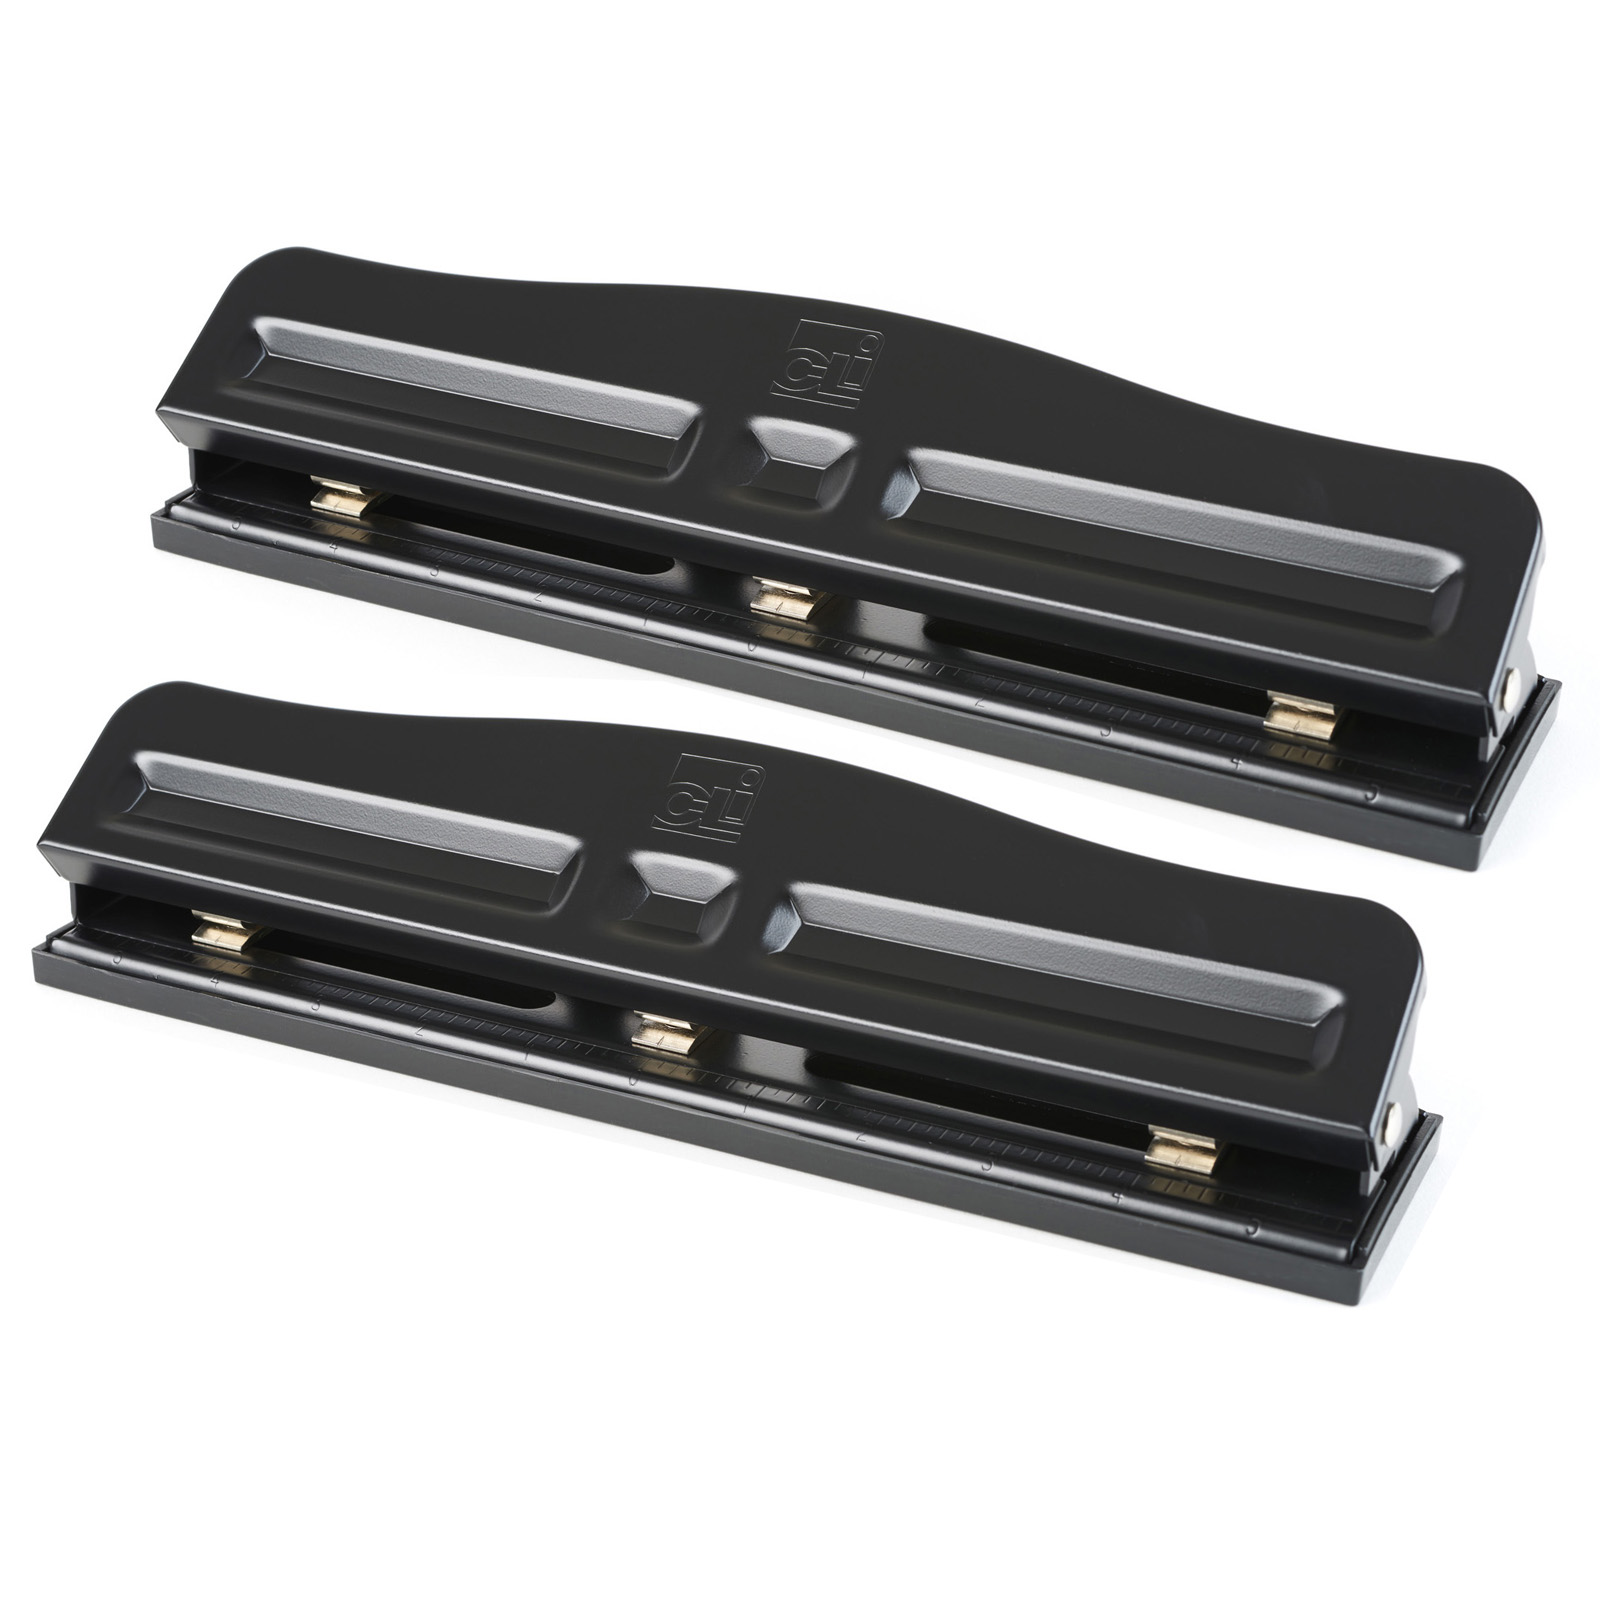 3-Hole Paper Punch, Adjustable Holes, 12 Sheet Capacity, Black, Pack of 2